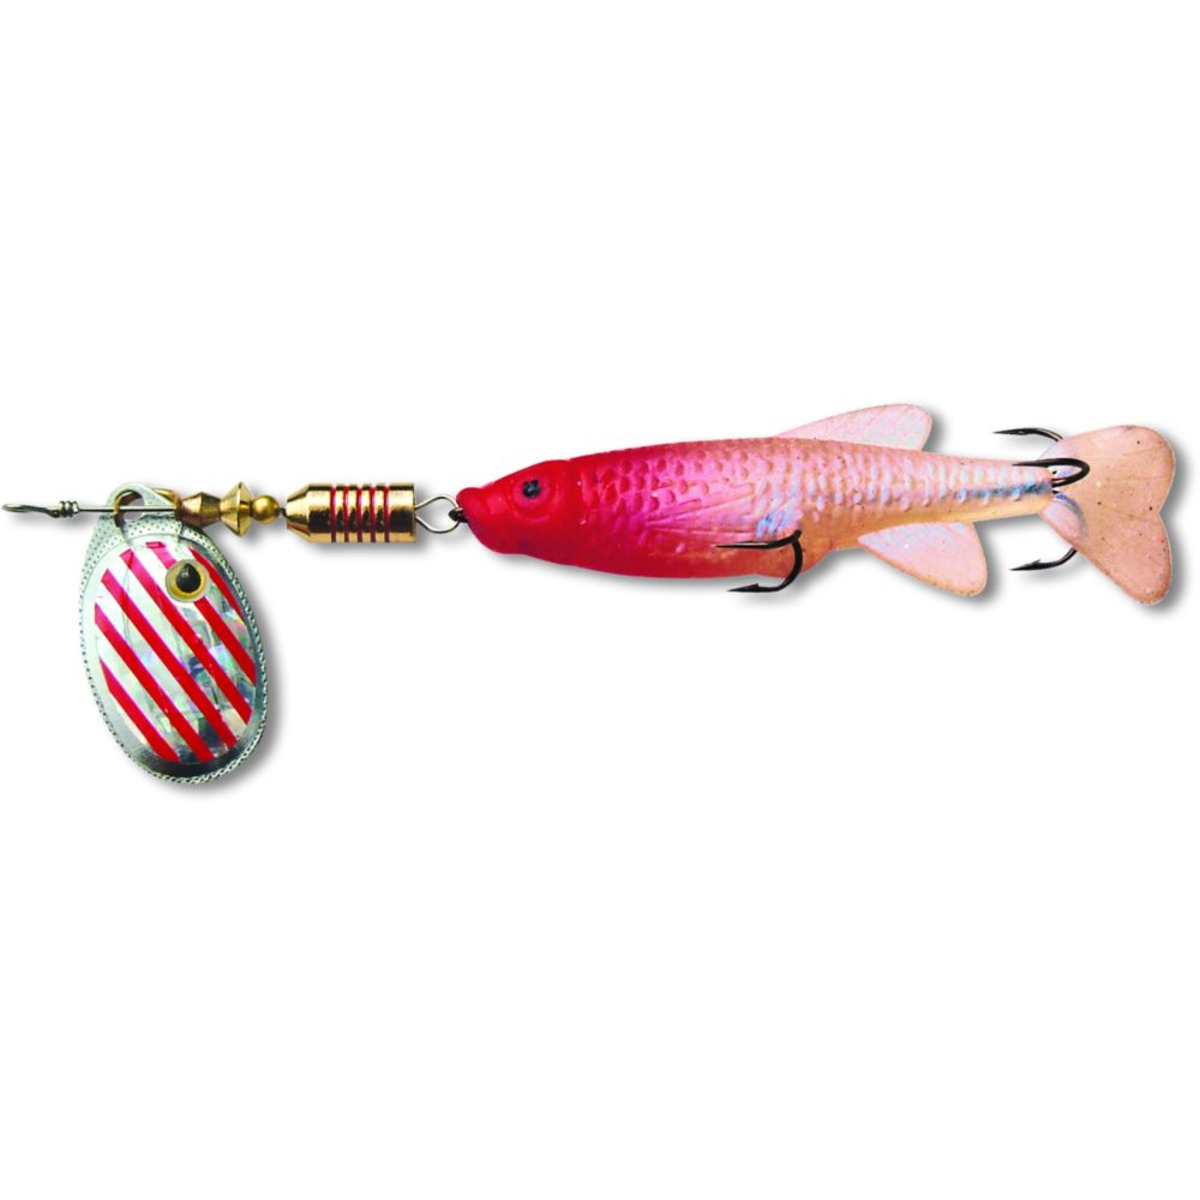 Zebco Minnow Flyer - 3 g - silver/red